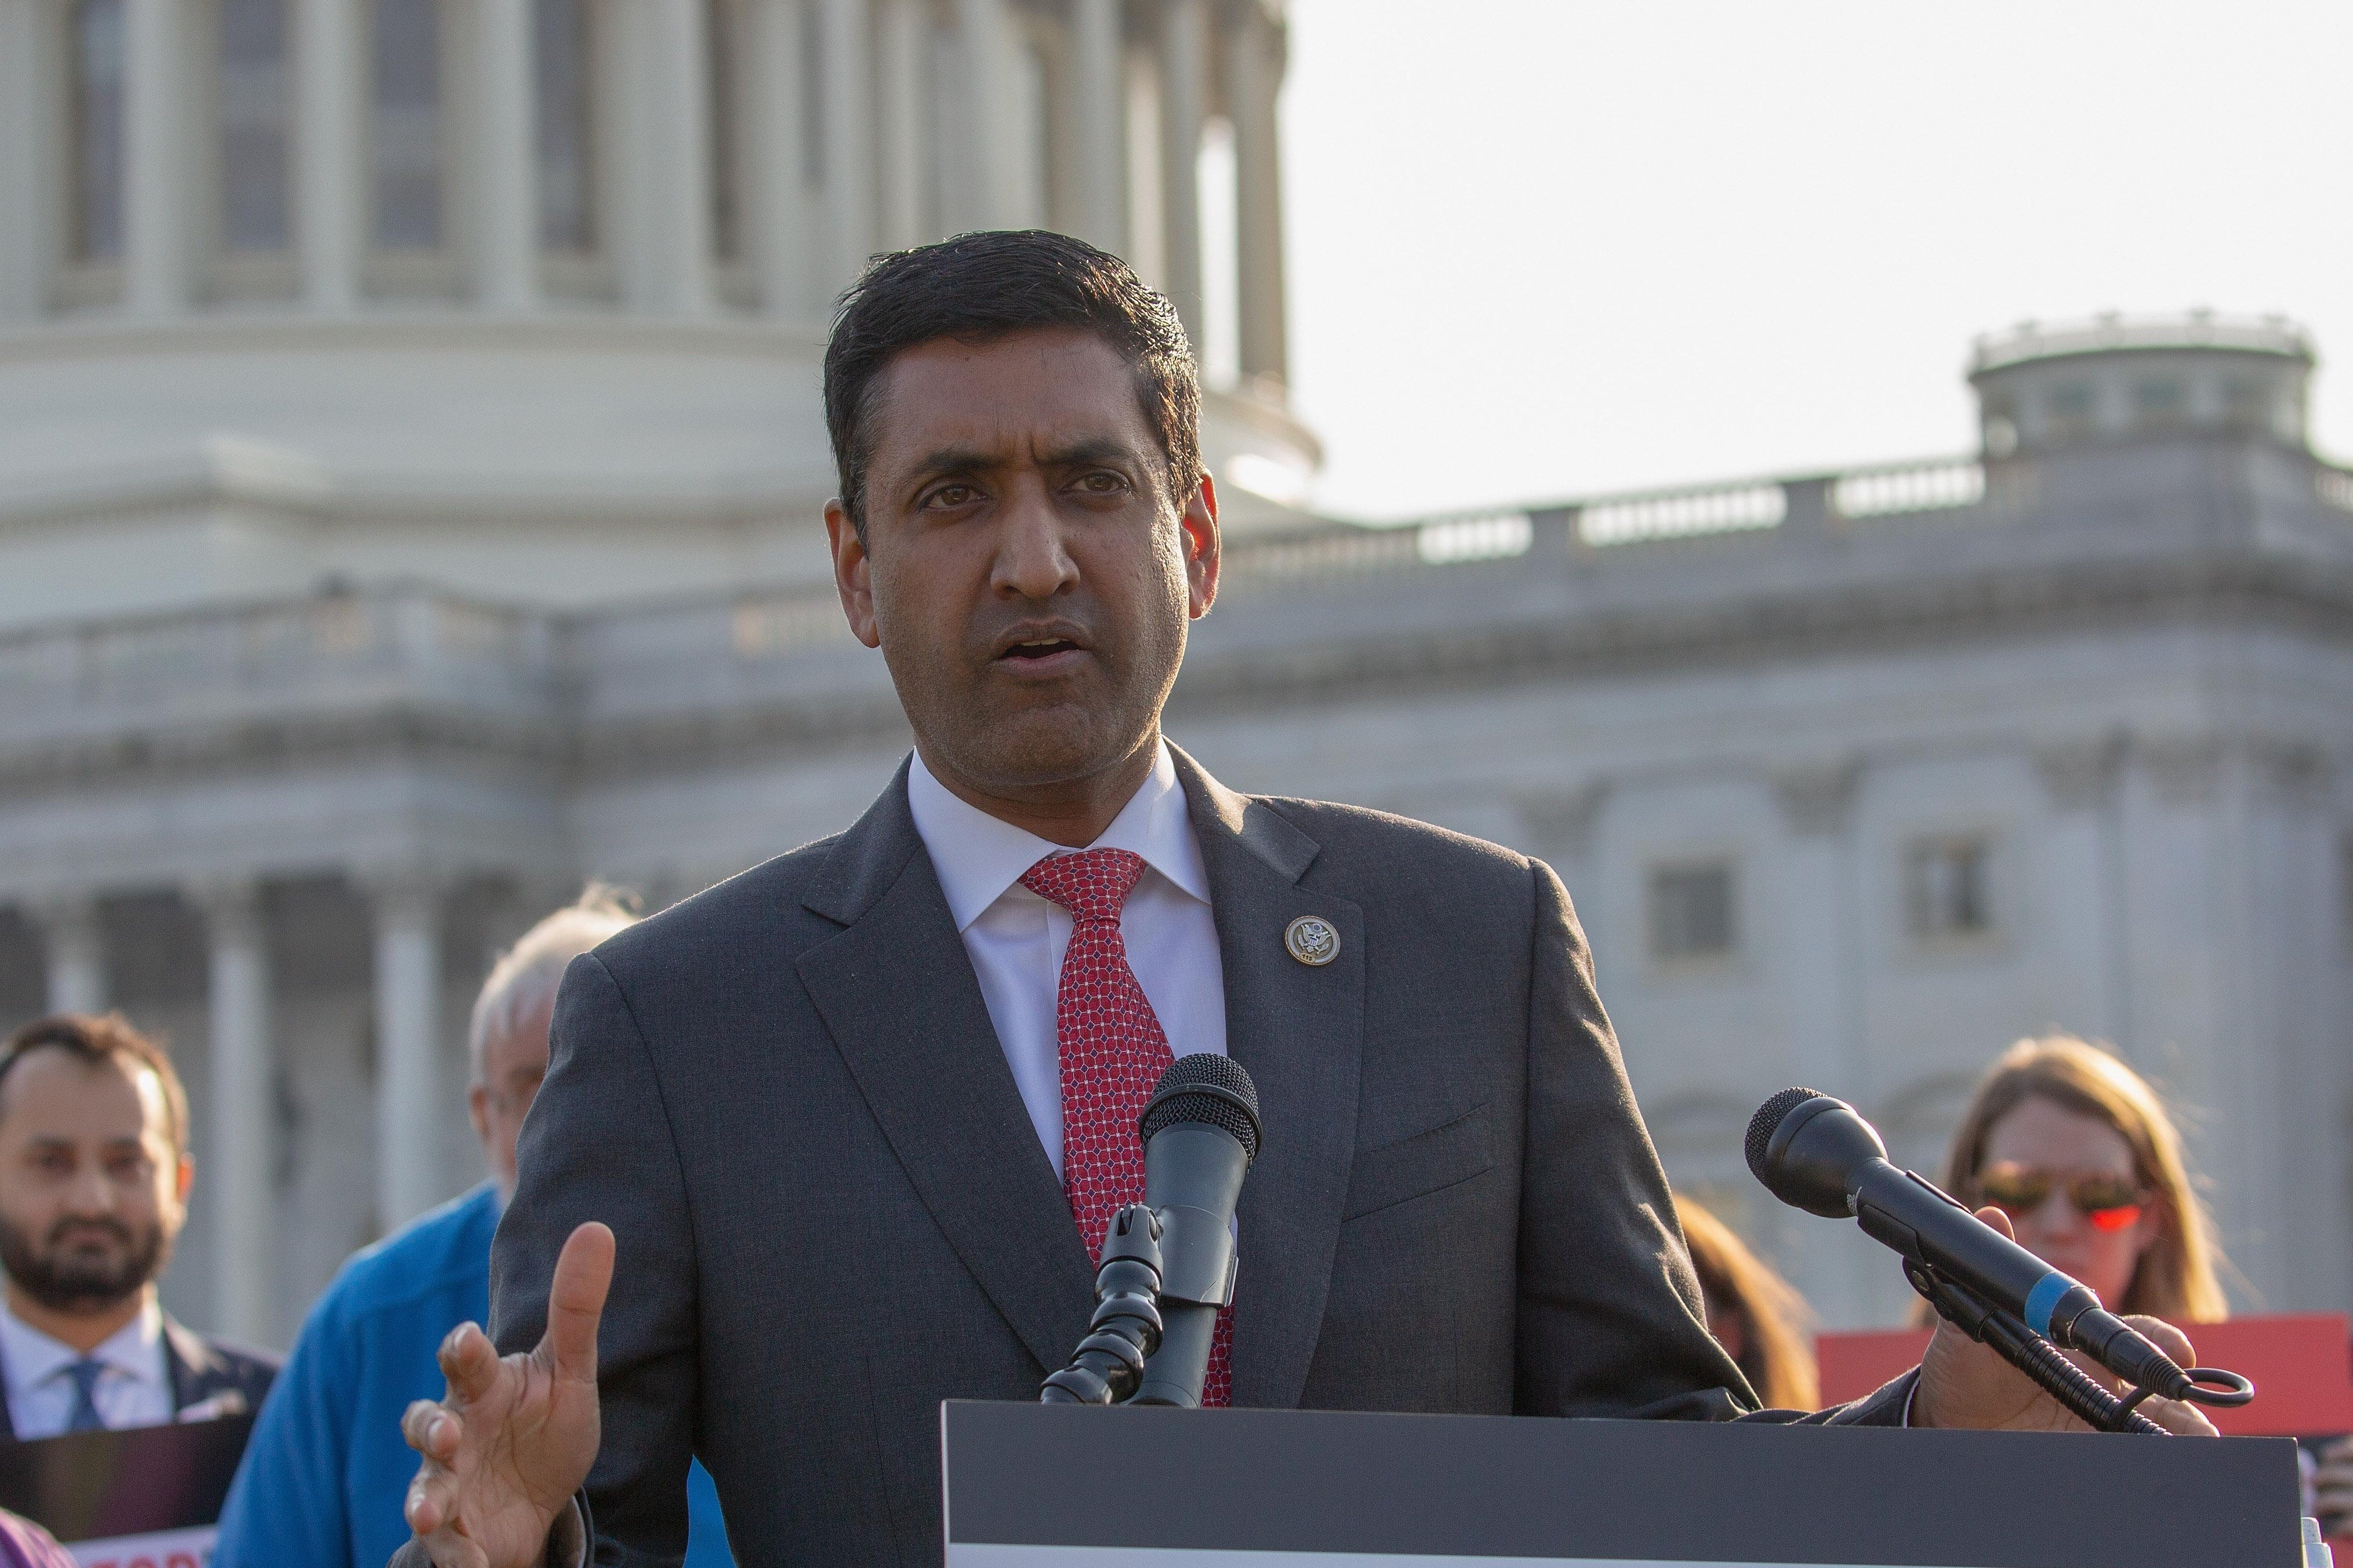 Ro Khanna at a lectern before the U.S. Capitol building